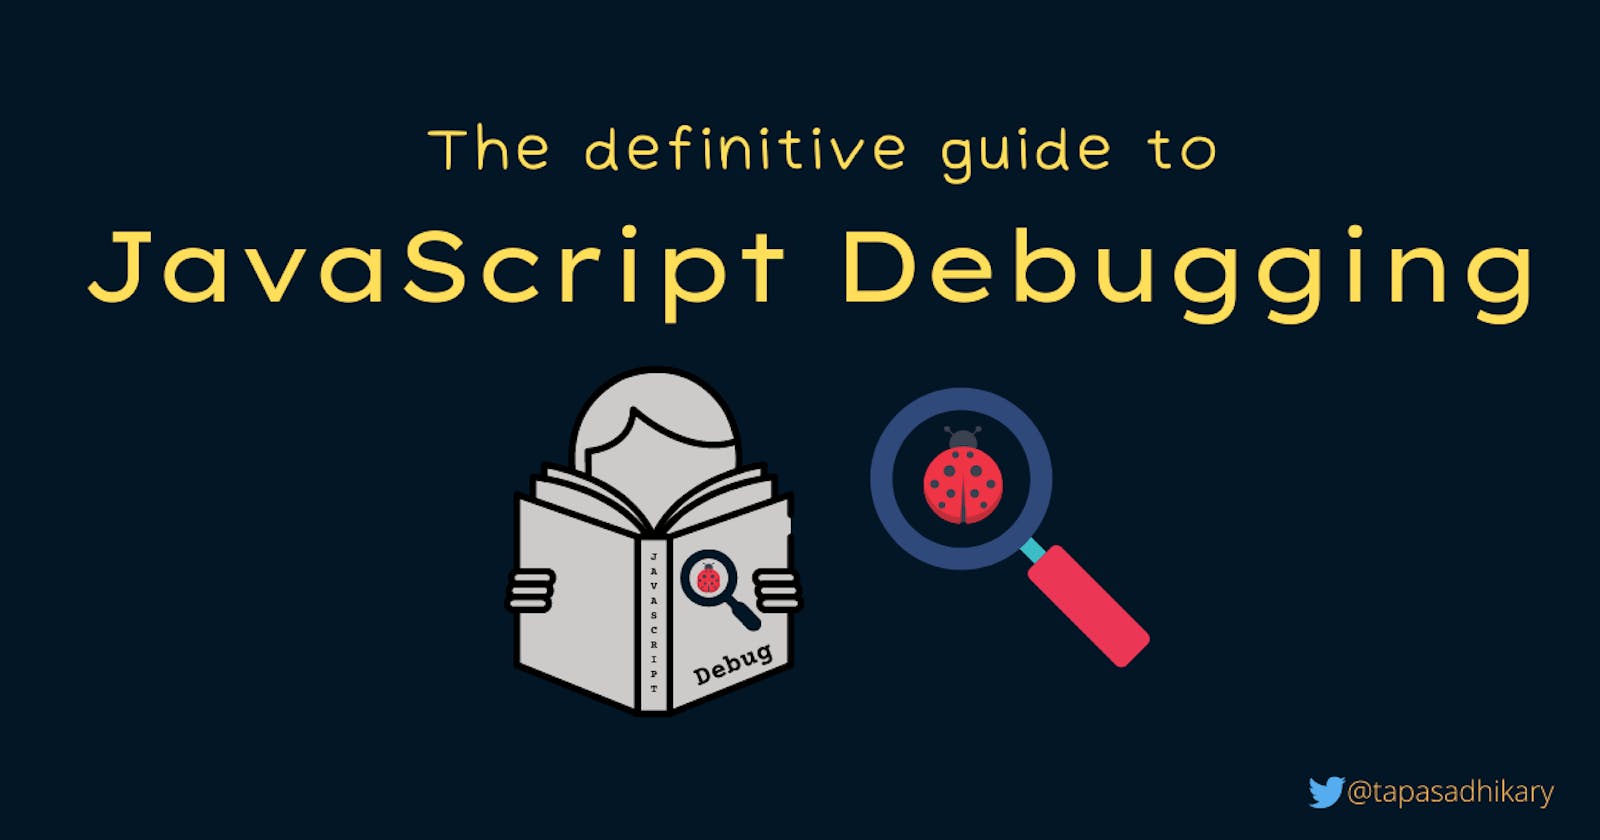 The definitive guide to JavaScript Debugging (2021 Edition)